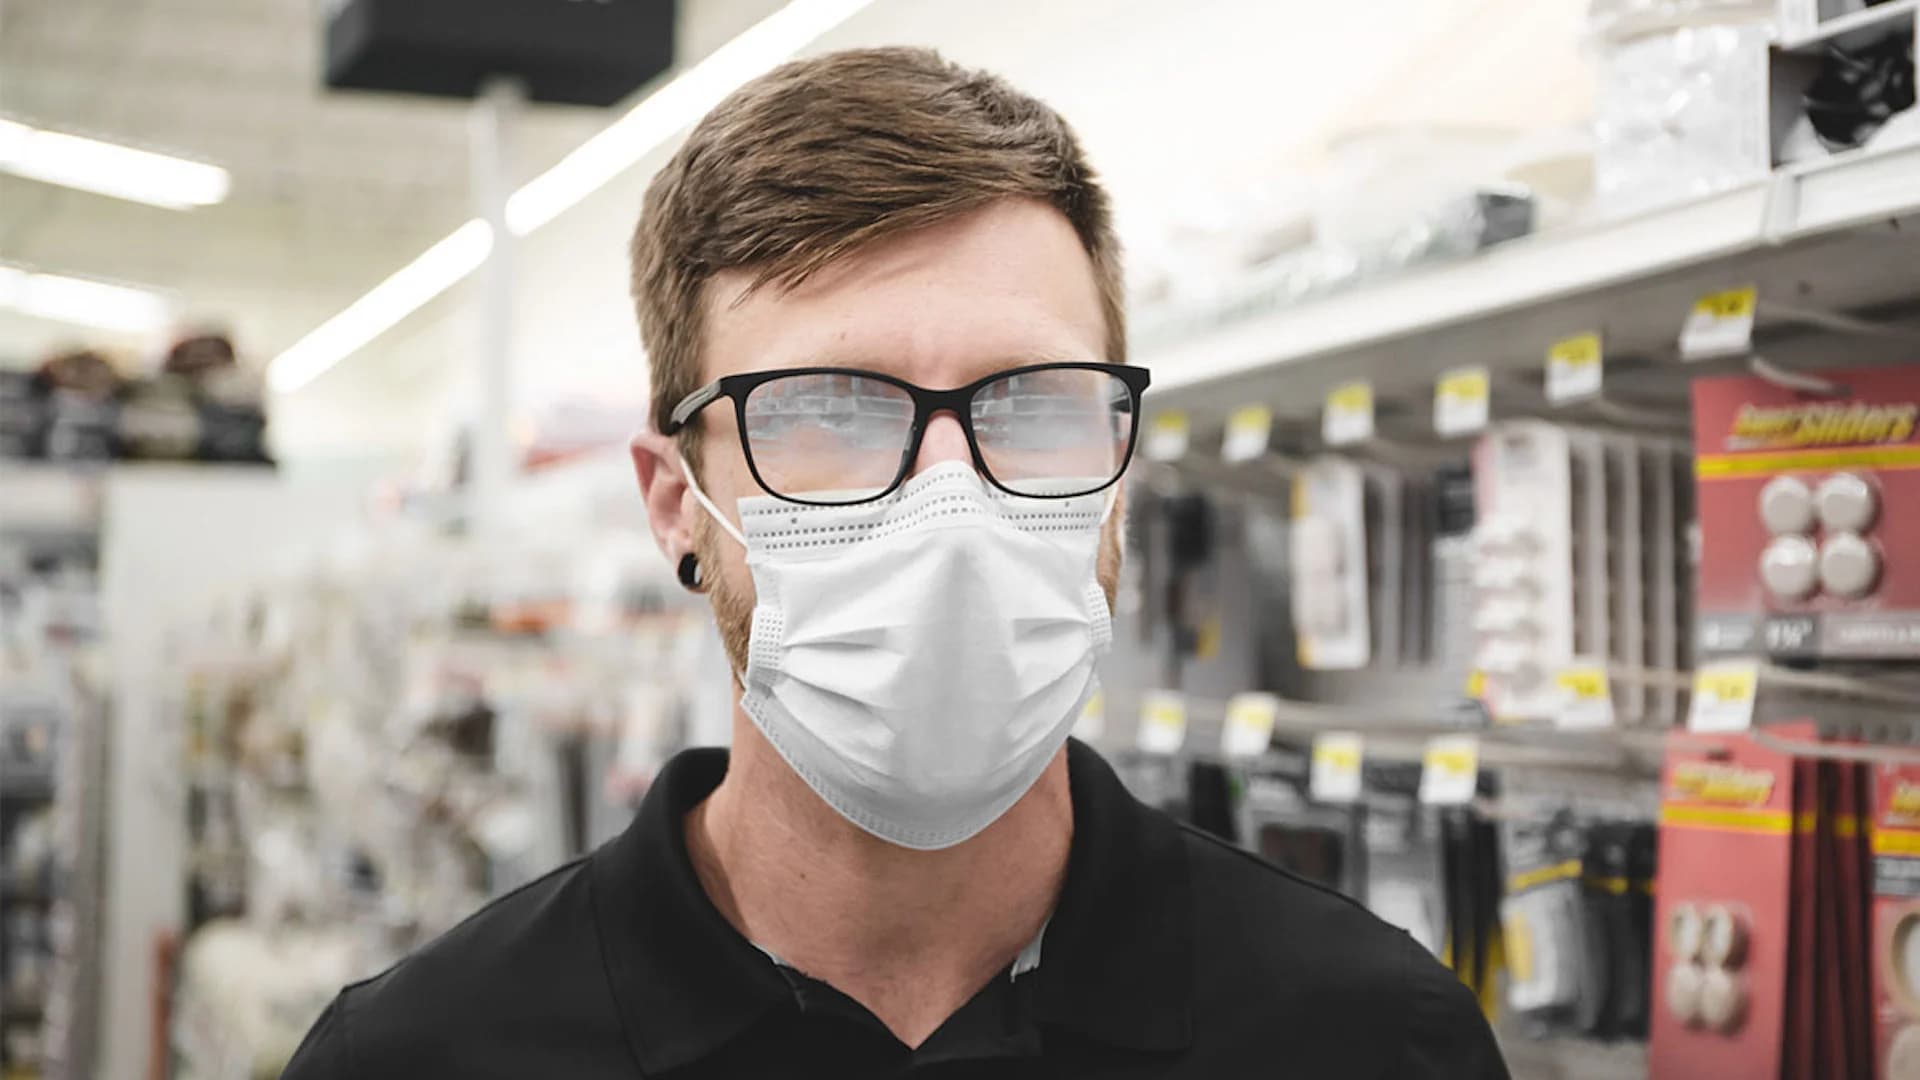 This spray keeps your glasses fog free while wearing a mask